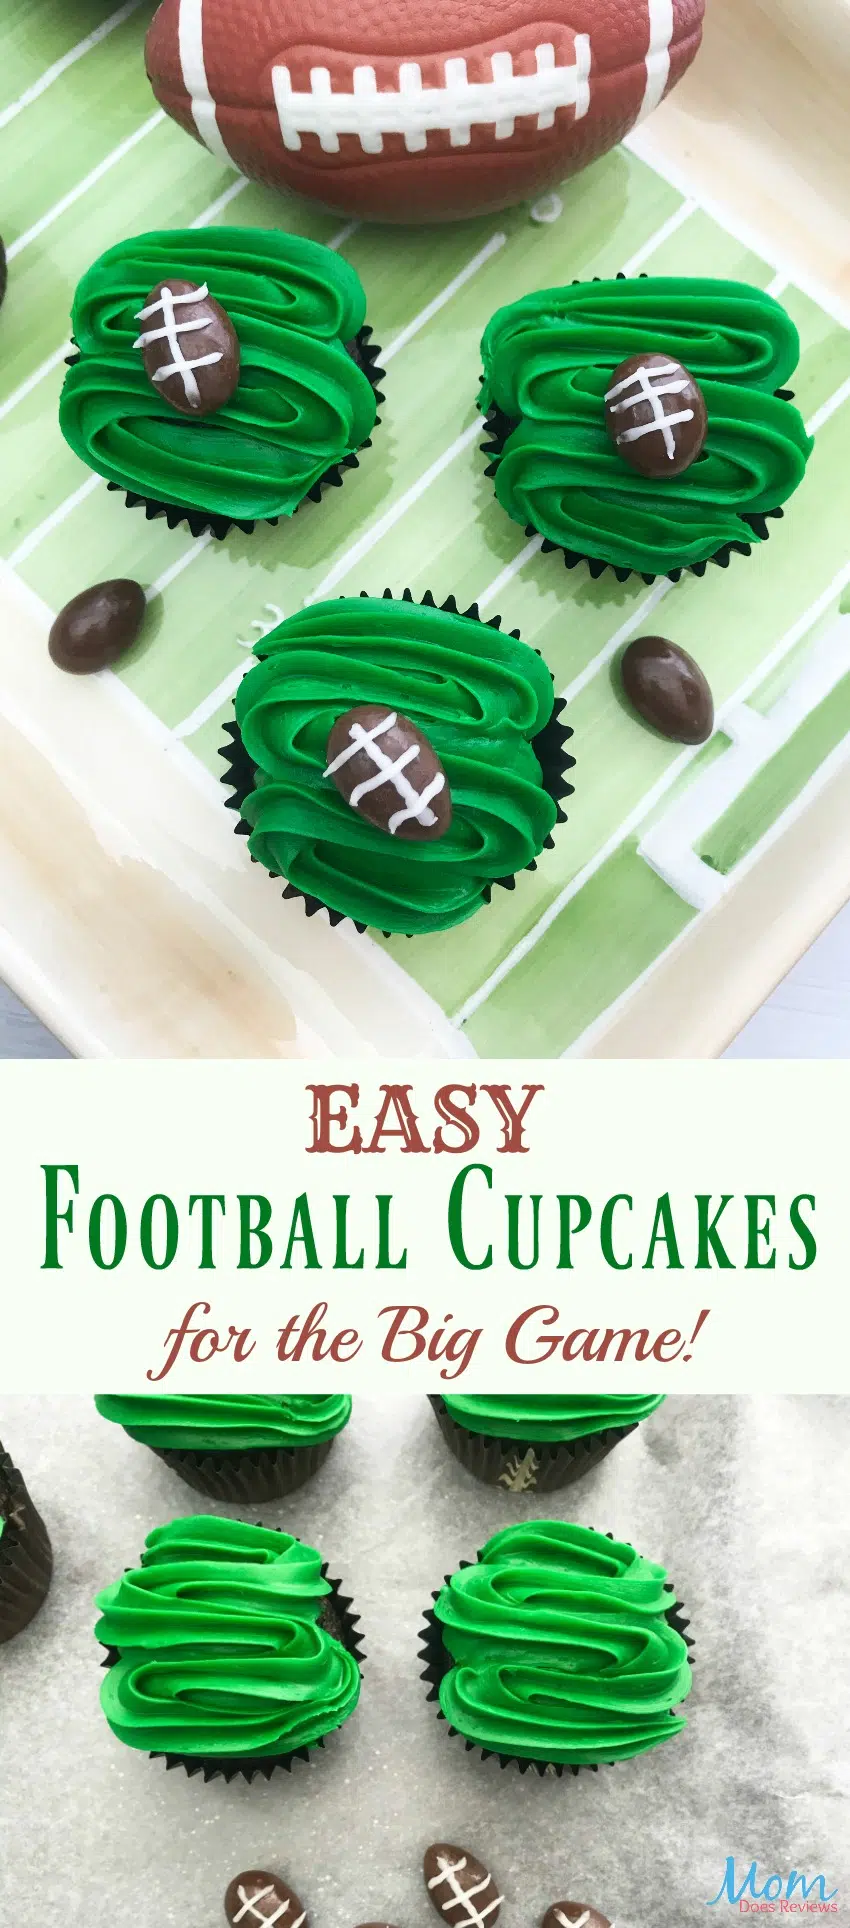 Easy Football Cupcakes for the Big Game #cupcakes #football #sweets #desserts #food #biggame